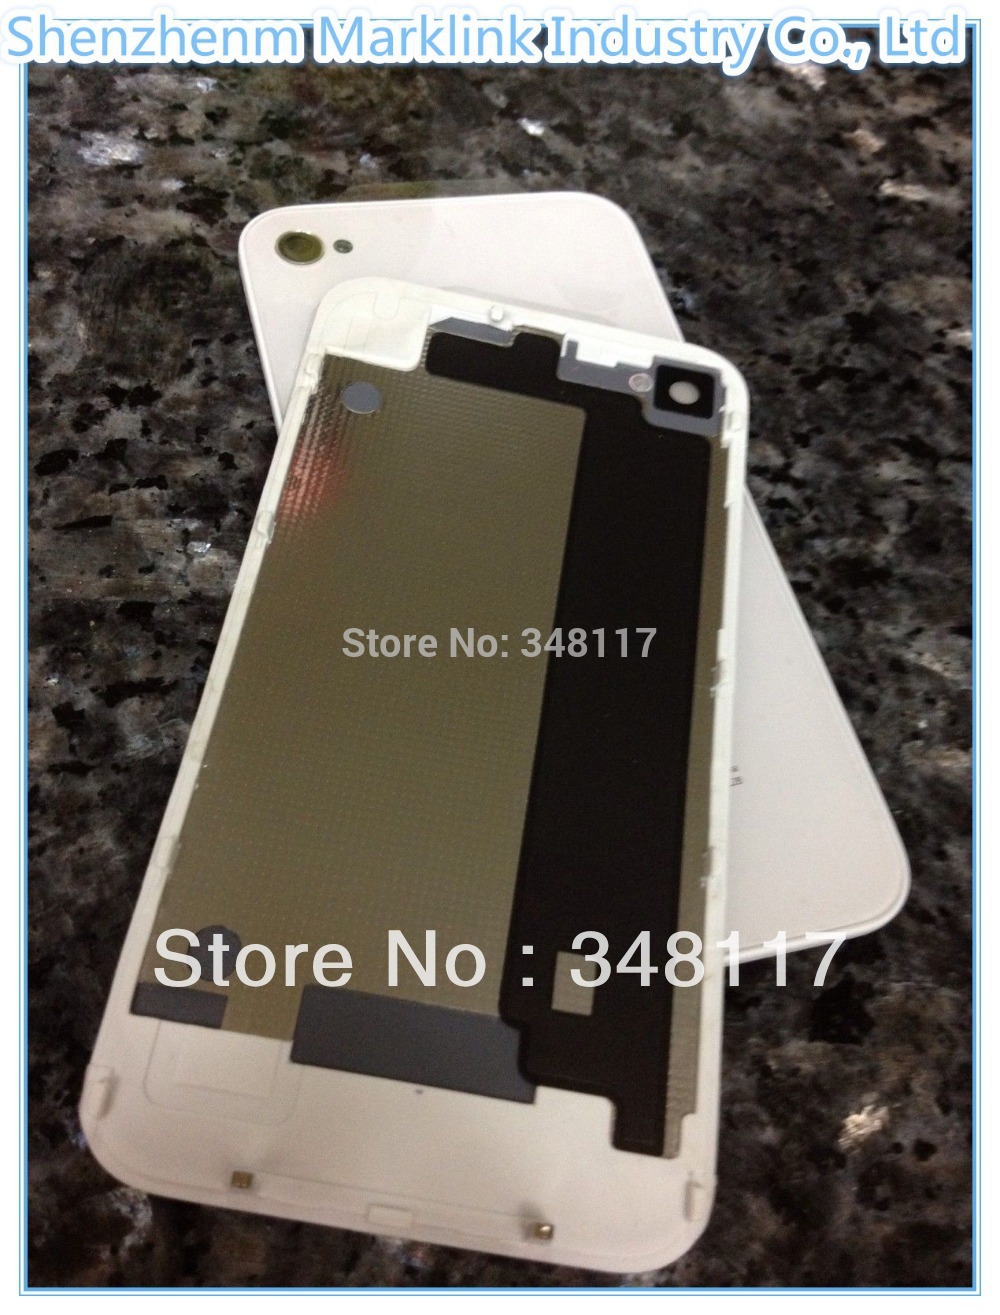 wholeases factory price Mobile Phone Parts Battery Door replacement Case In White and black Color For